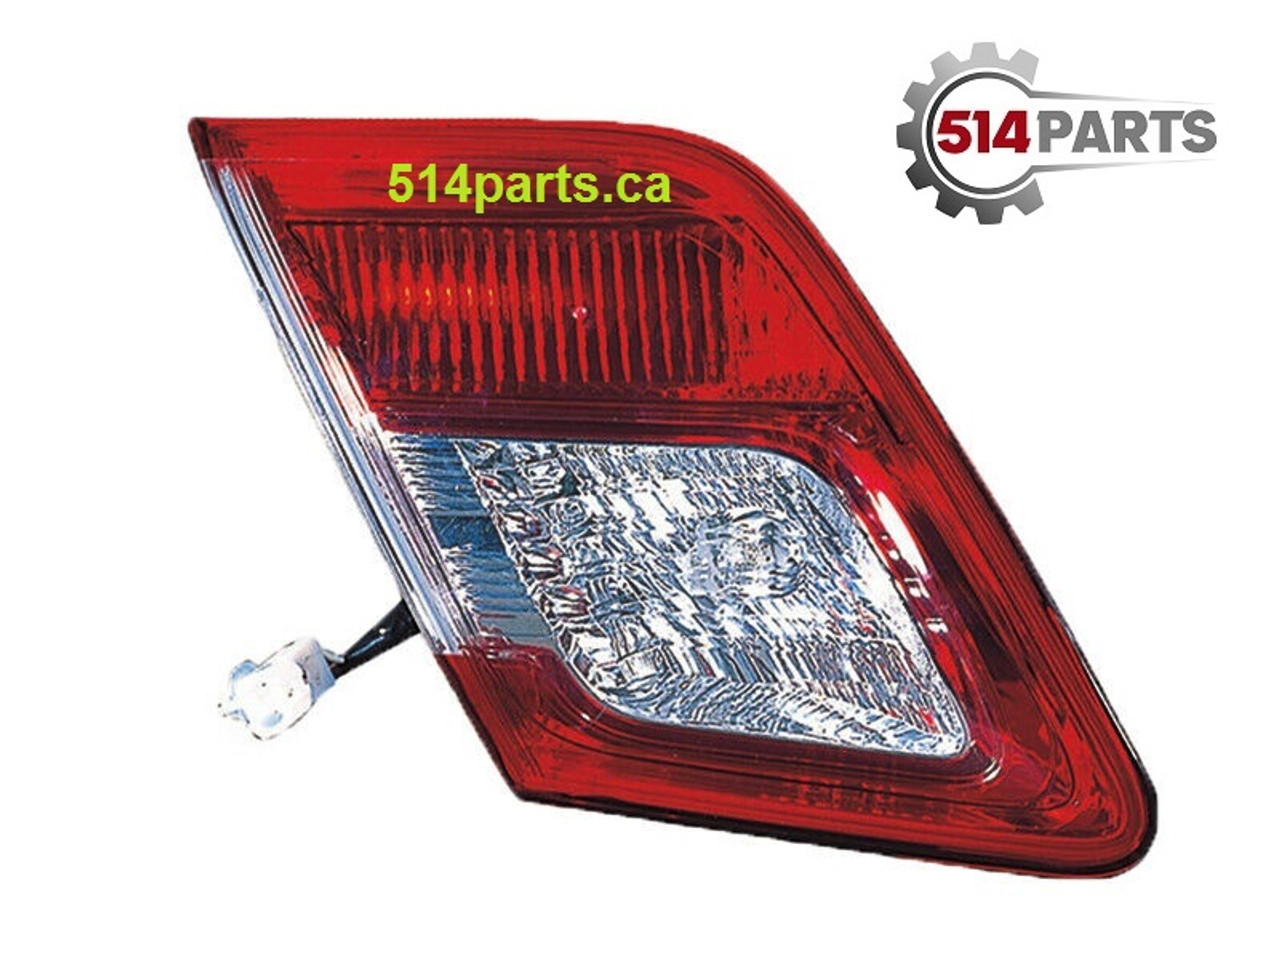 2010 - 2011 TOYOTA CAMRY JAPAN BUILT MODELS Inner TAIL LIGHTS(BACK-UP LAMP) High Quality - PHARES ARRIERE Interne(LAMPE DE RECUL) Haute Qualite